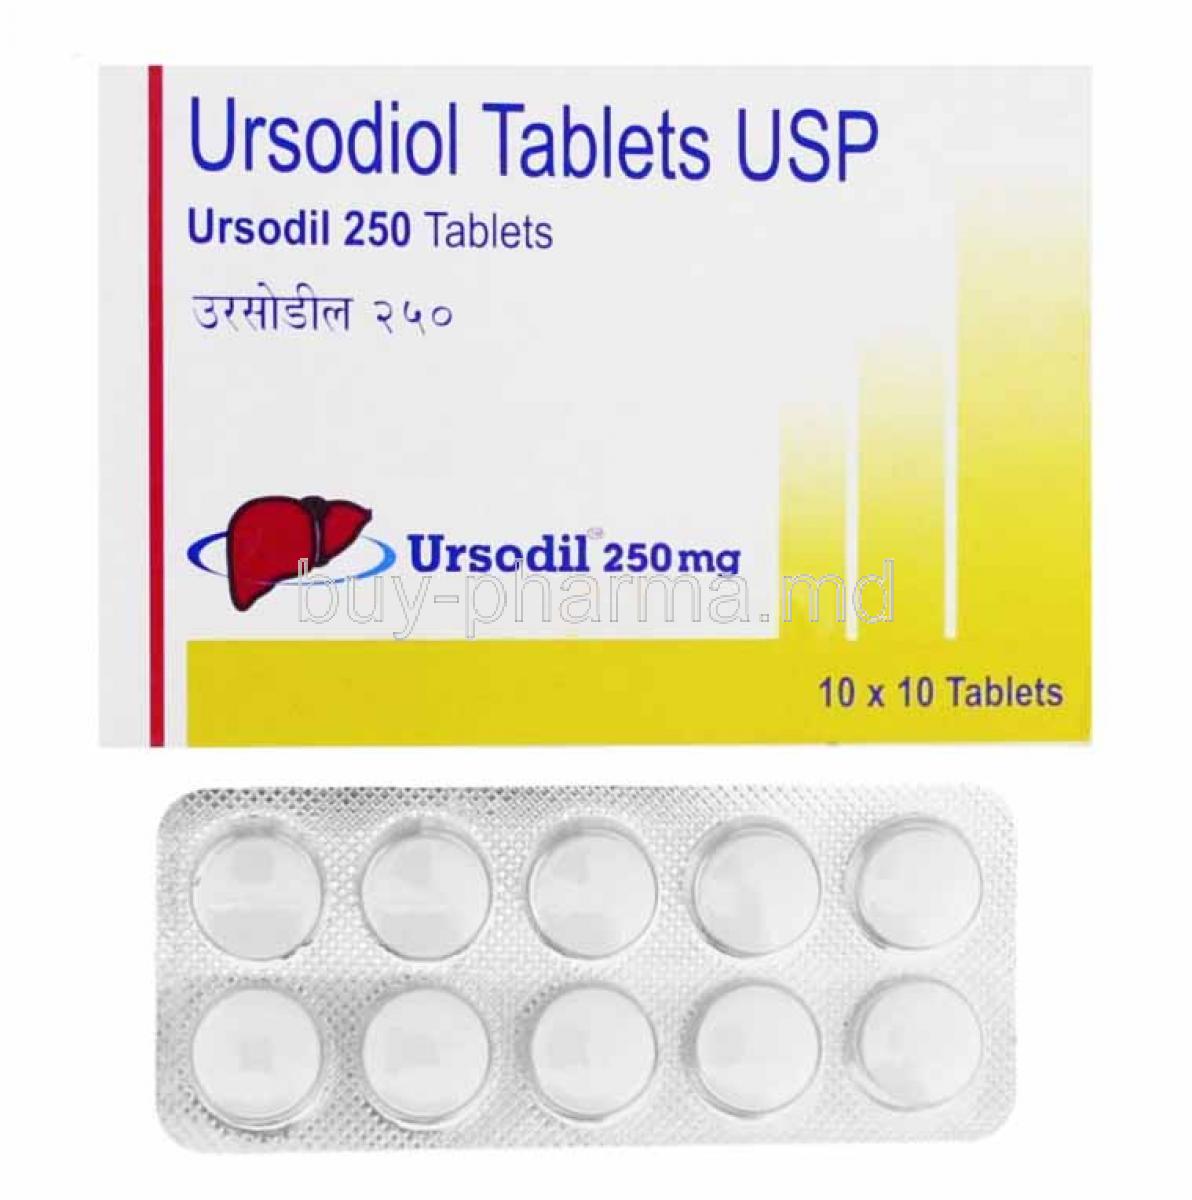 Ursodil, Ursodiol 250mg box and tablets